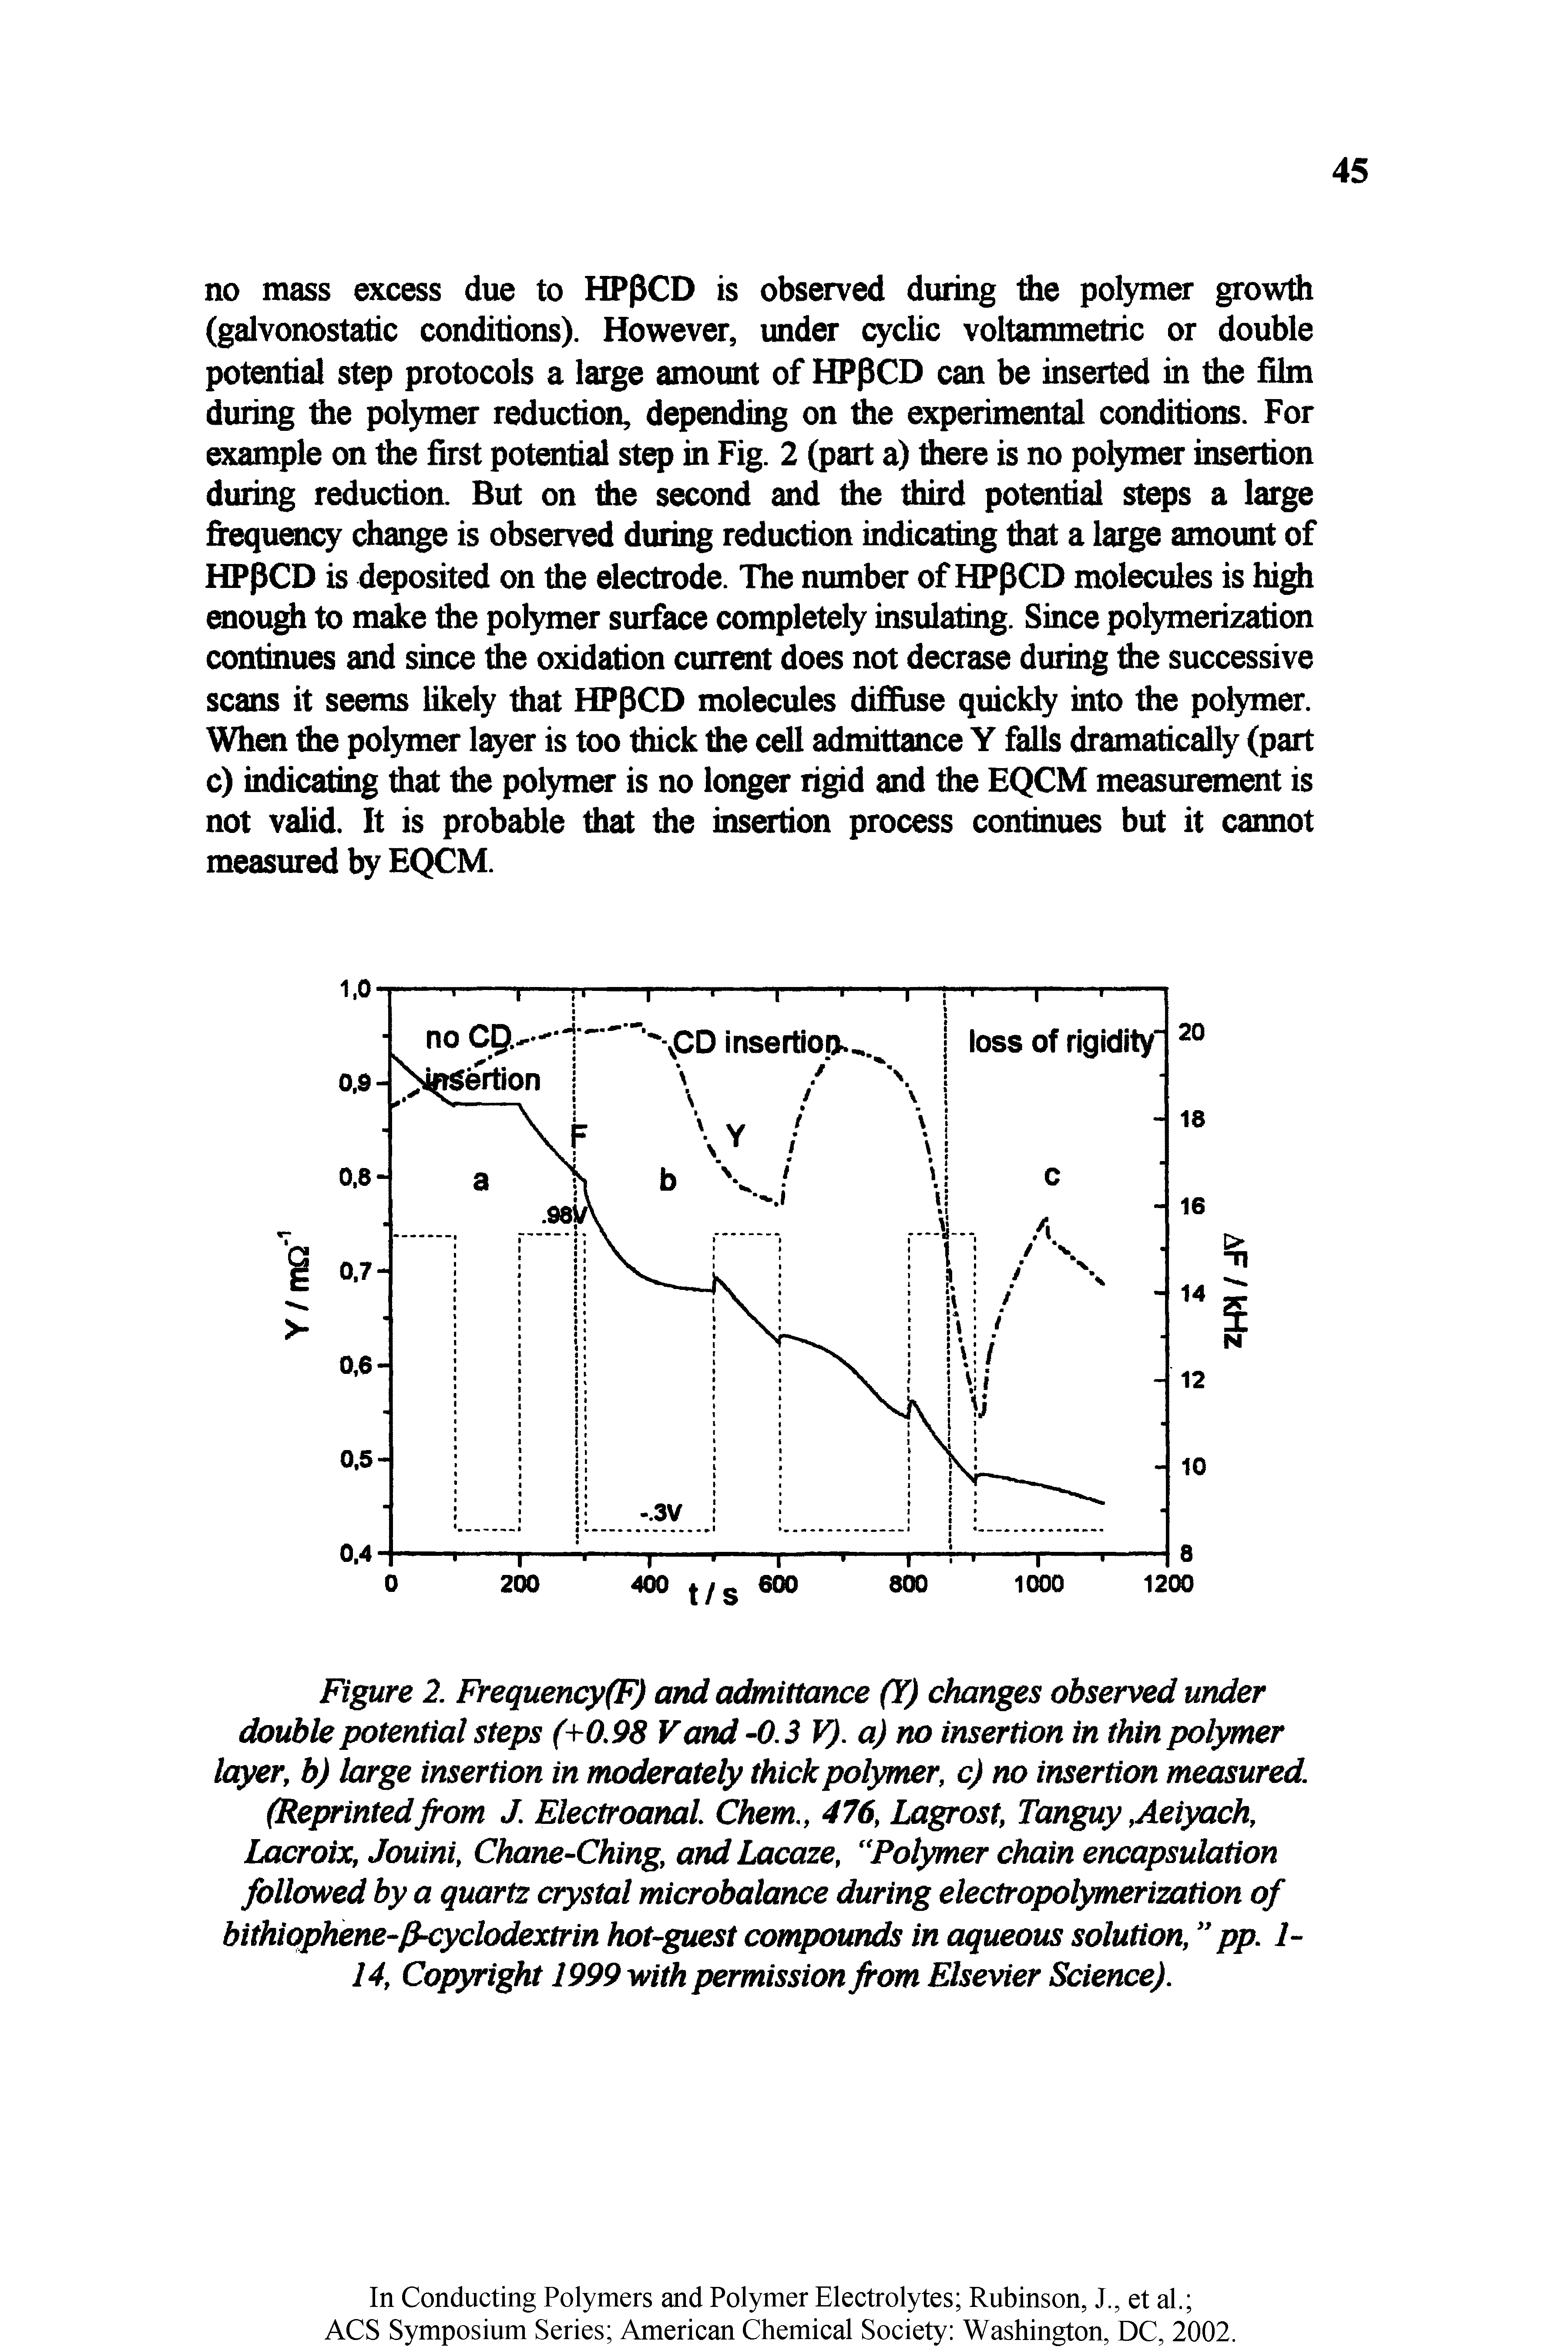 Figure 2. Frequency(F) and admittance (Y) changes observed under double potential steps (+0.98 Vand 4), 3 V). a) no insertion in thin polymer layer, b) large insertion in moderately thick polymer, c) no insertion measured. (Reprintedfrom J. Electroanal Chem., 476, Lagjrost, Tanguy, Aeiyach, Lacroix, Jouini, Chane-Ching, and Lacaze, Polymer chain encapsulation followed by a quartz crystal microbalance during electropolymerization of bithiqphene-J3-cyclodextrin hot-guest compounds in aqueous solution, pp. 1-14, Copyright 1999 with permission from Elsevier Science).